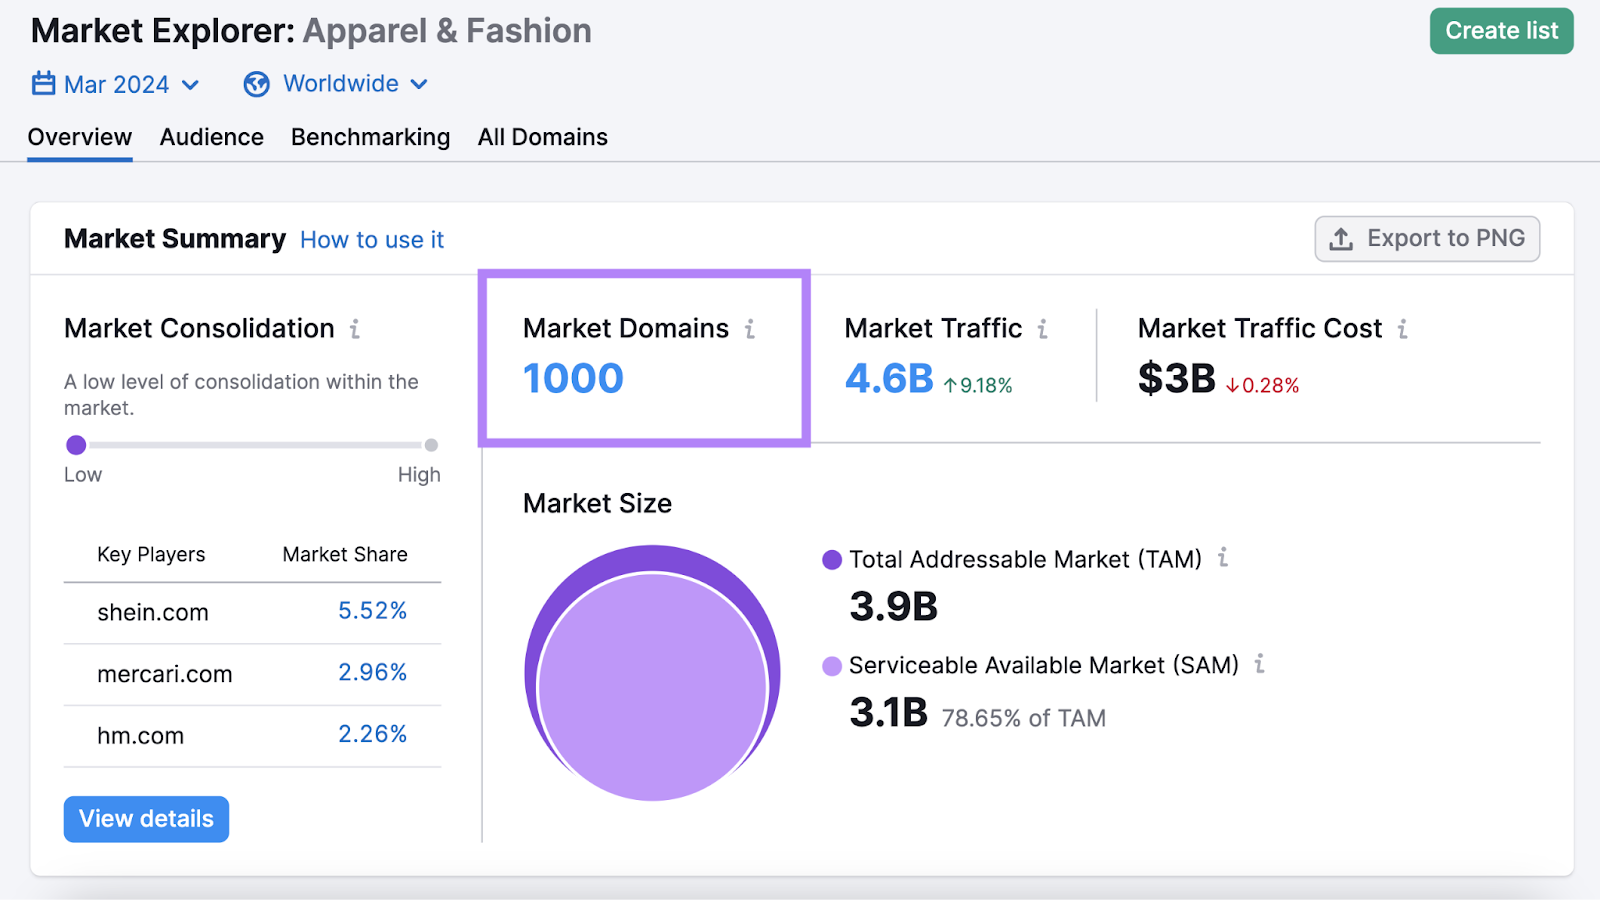 apparel and fashion has 1000 market domains